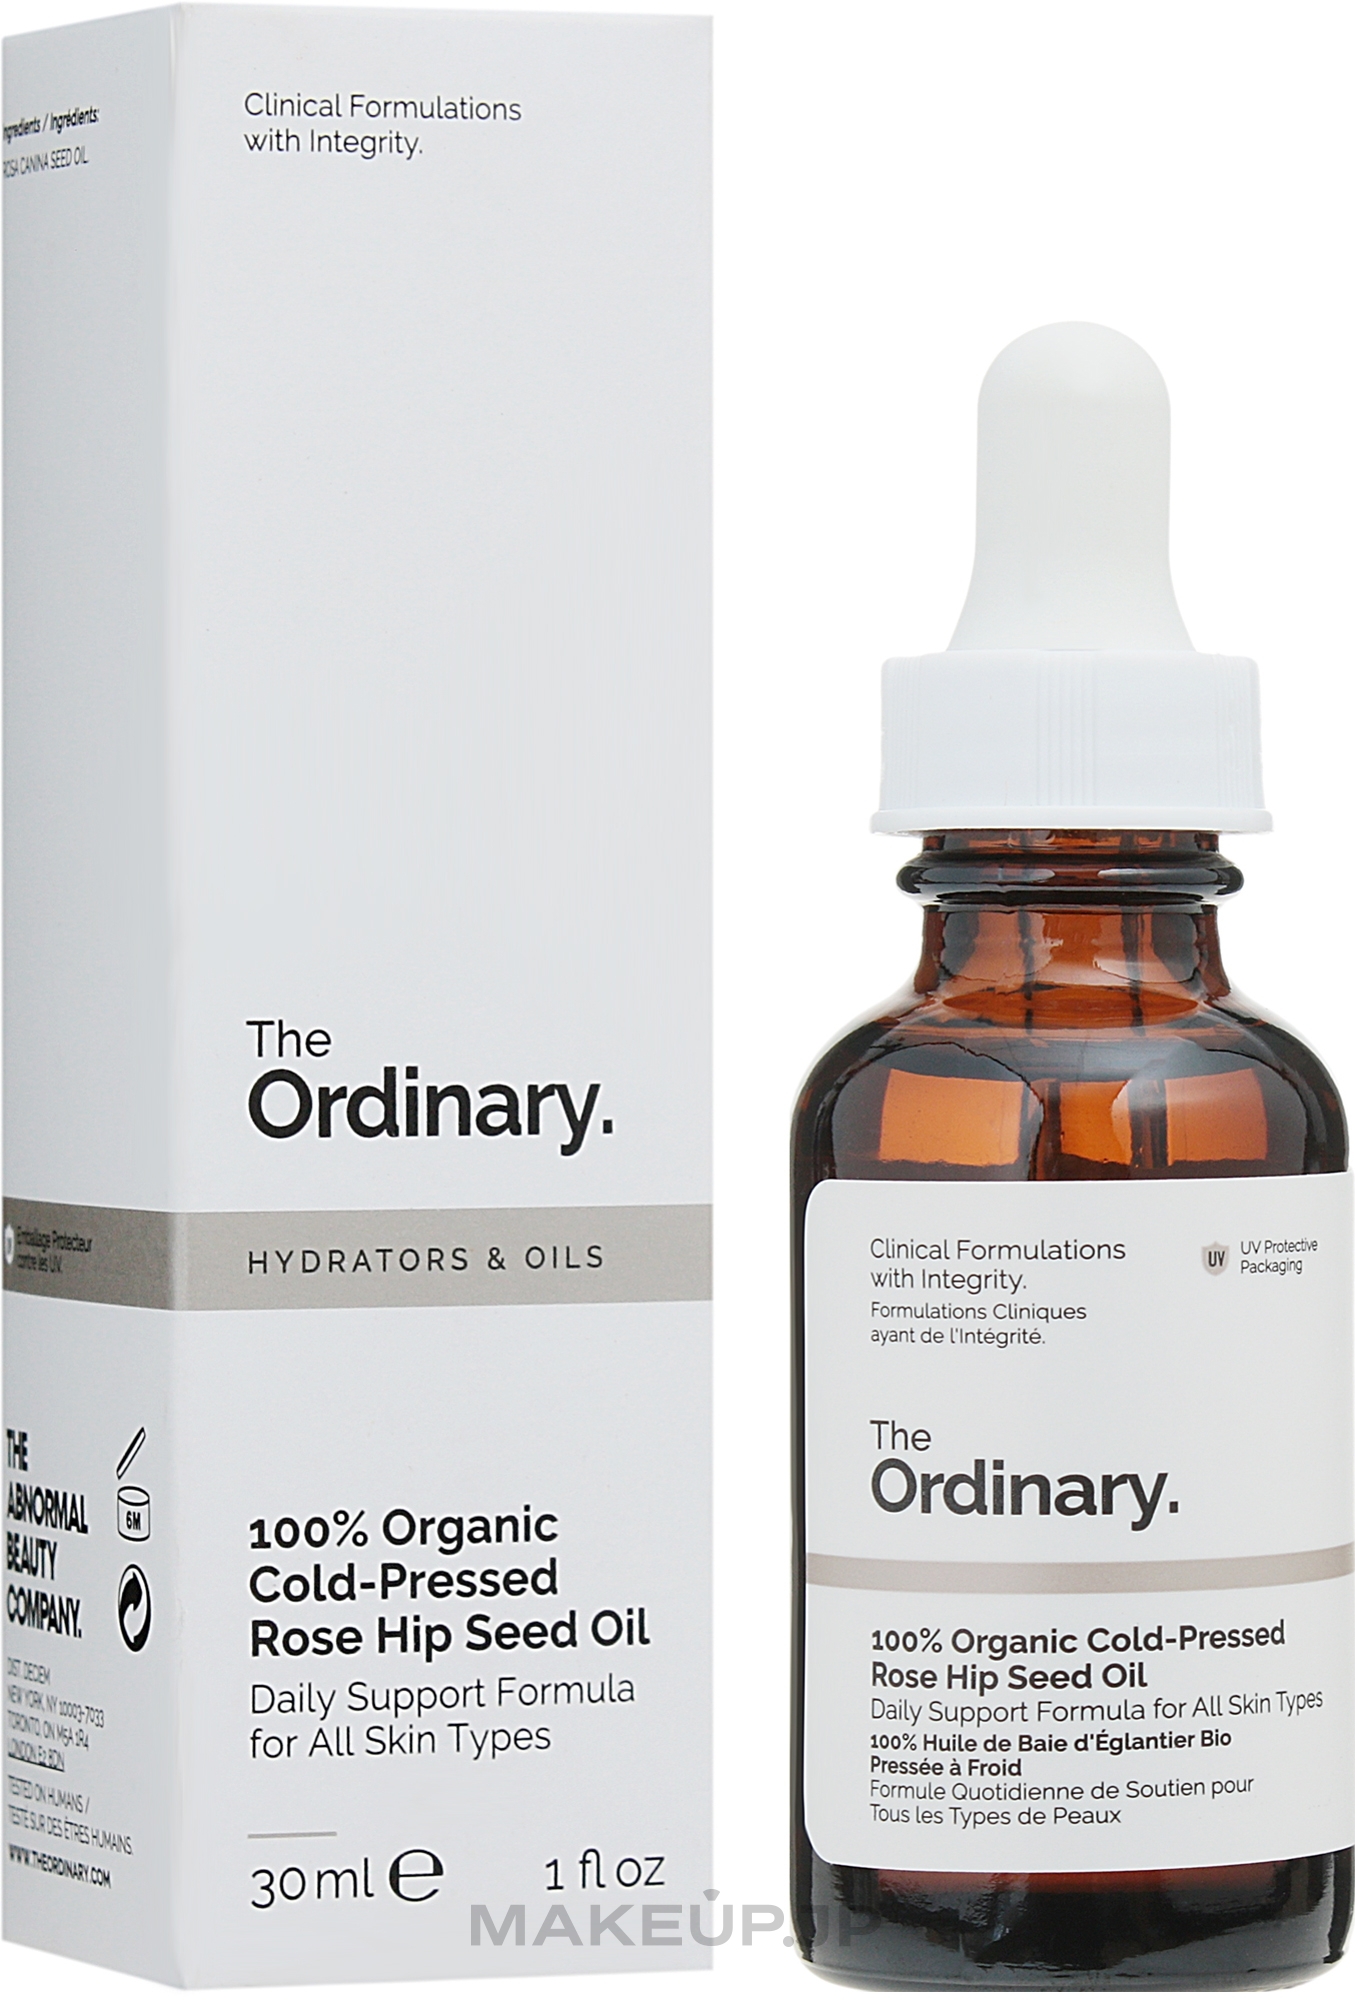 Organic Cold-Pressed Rose Hip Seed Oil - The Ordinary Hydrators & Oils 100% Organic Cold-Pressed Rose Hip Seed Oil — photo 30 ml